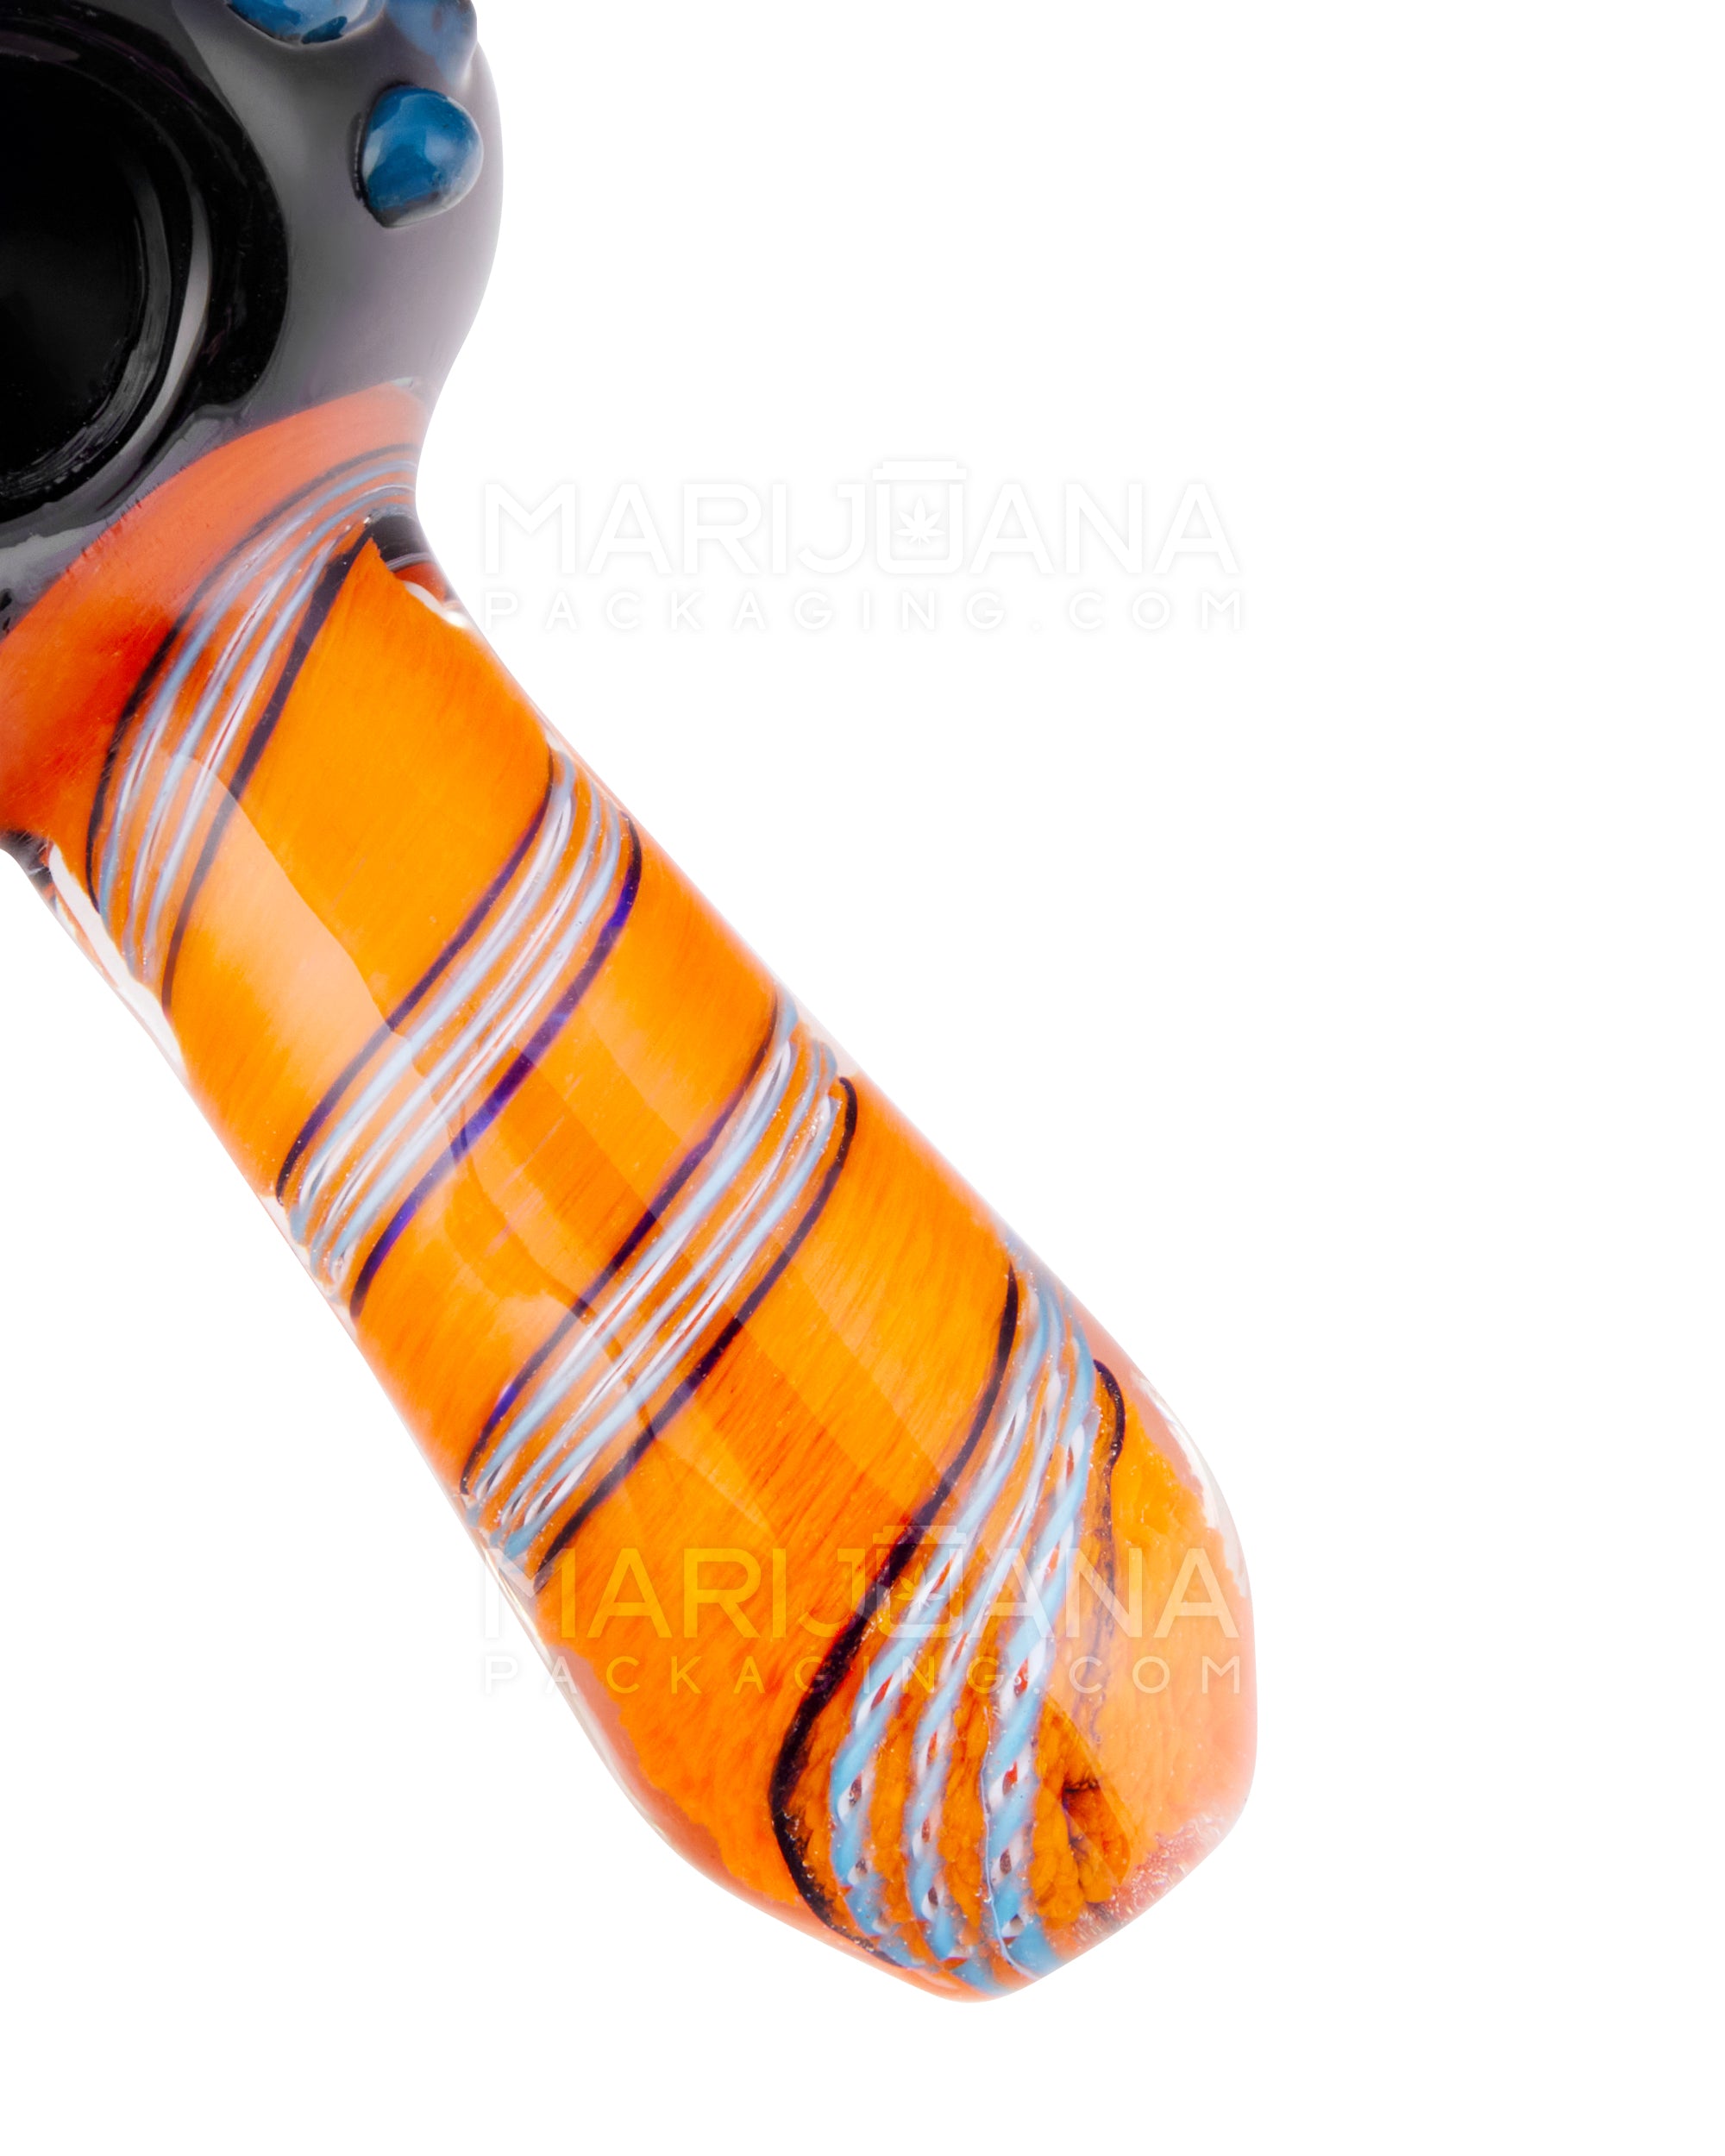 Frit Swirl Honeycomb Bowl Hand Pipe w/ Triple Mini Knockers | 4.25in Long - Glass - Assorted